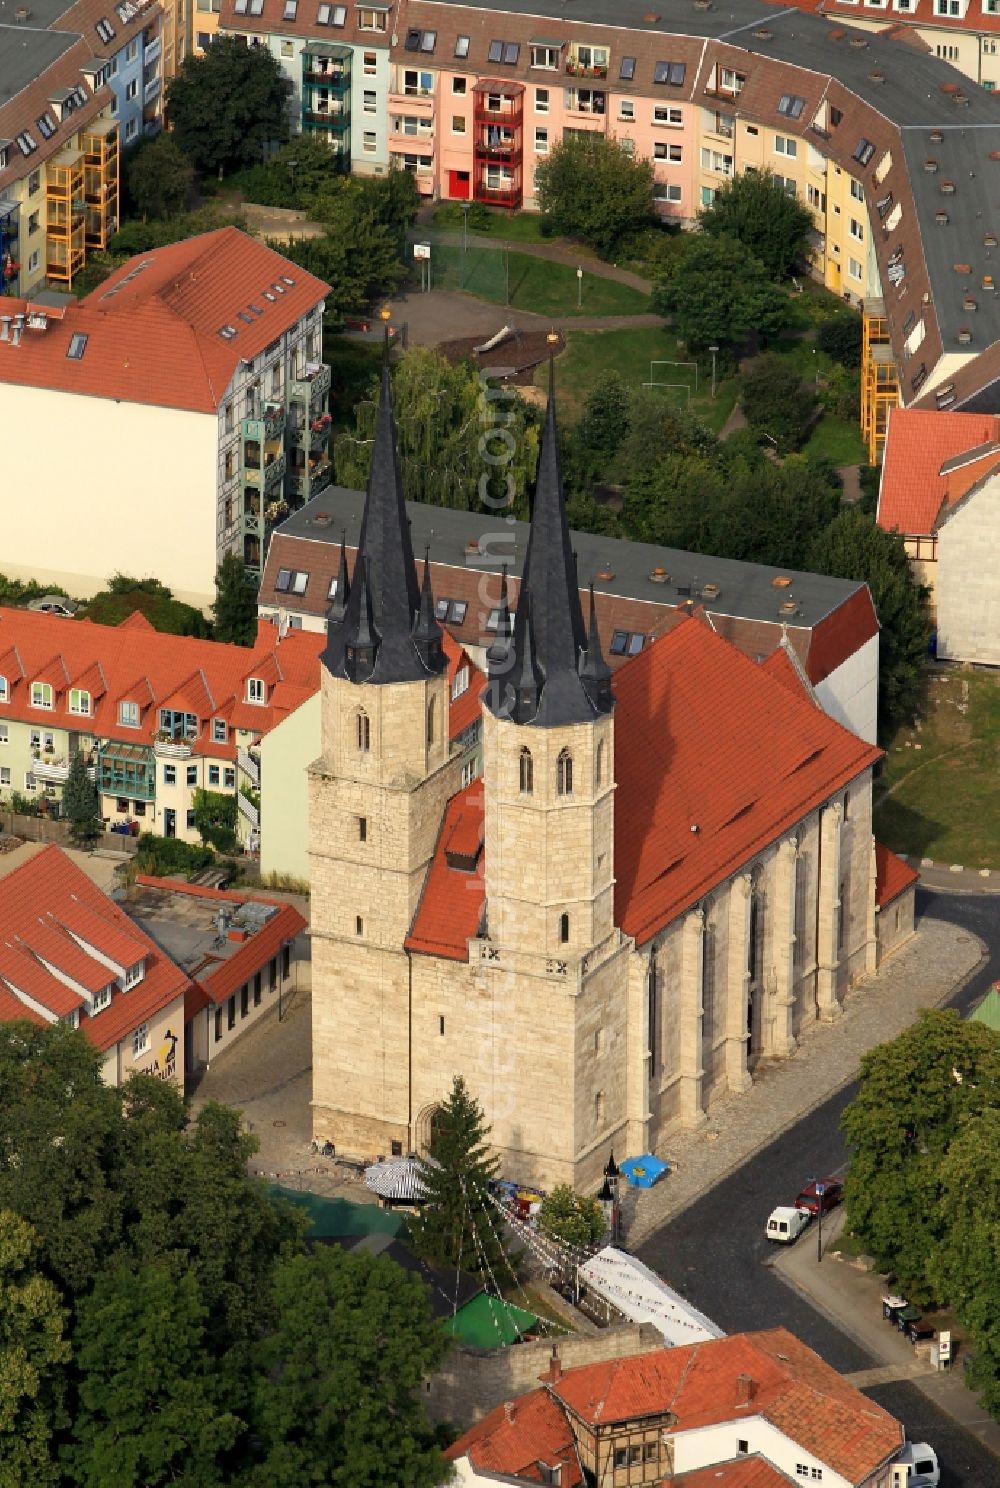 Mühlhausen from above - Jakobi church at Jakobistrasse in Muehlhausen in Thuringia. The church now serves as the town library